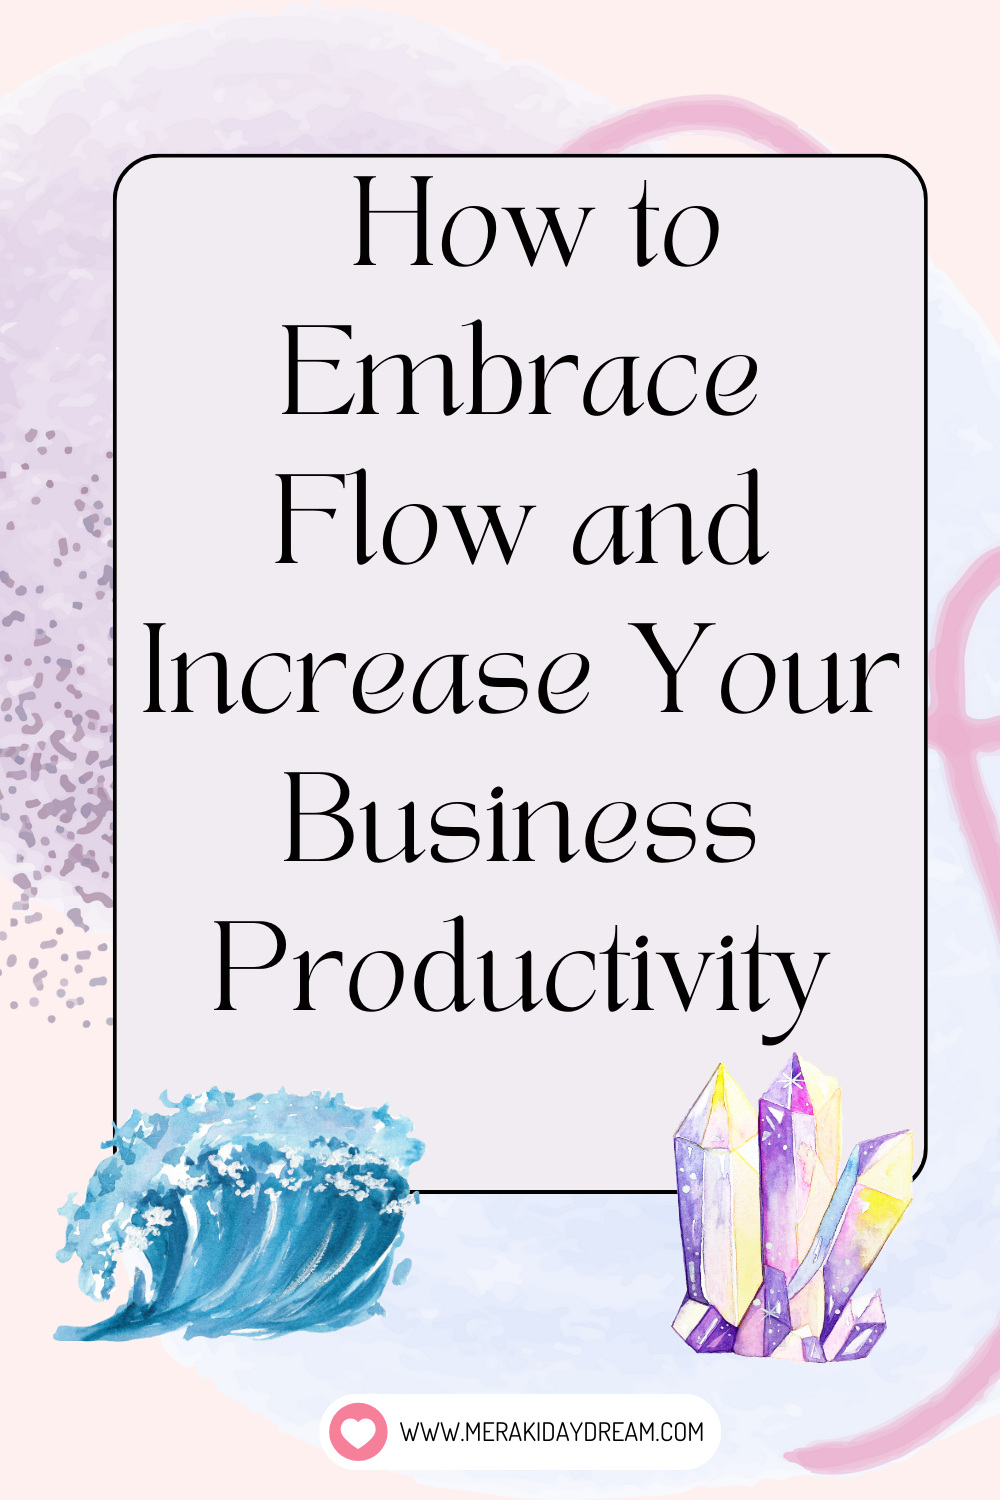 How to Embrace Flow and Increase Your Business Productivity